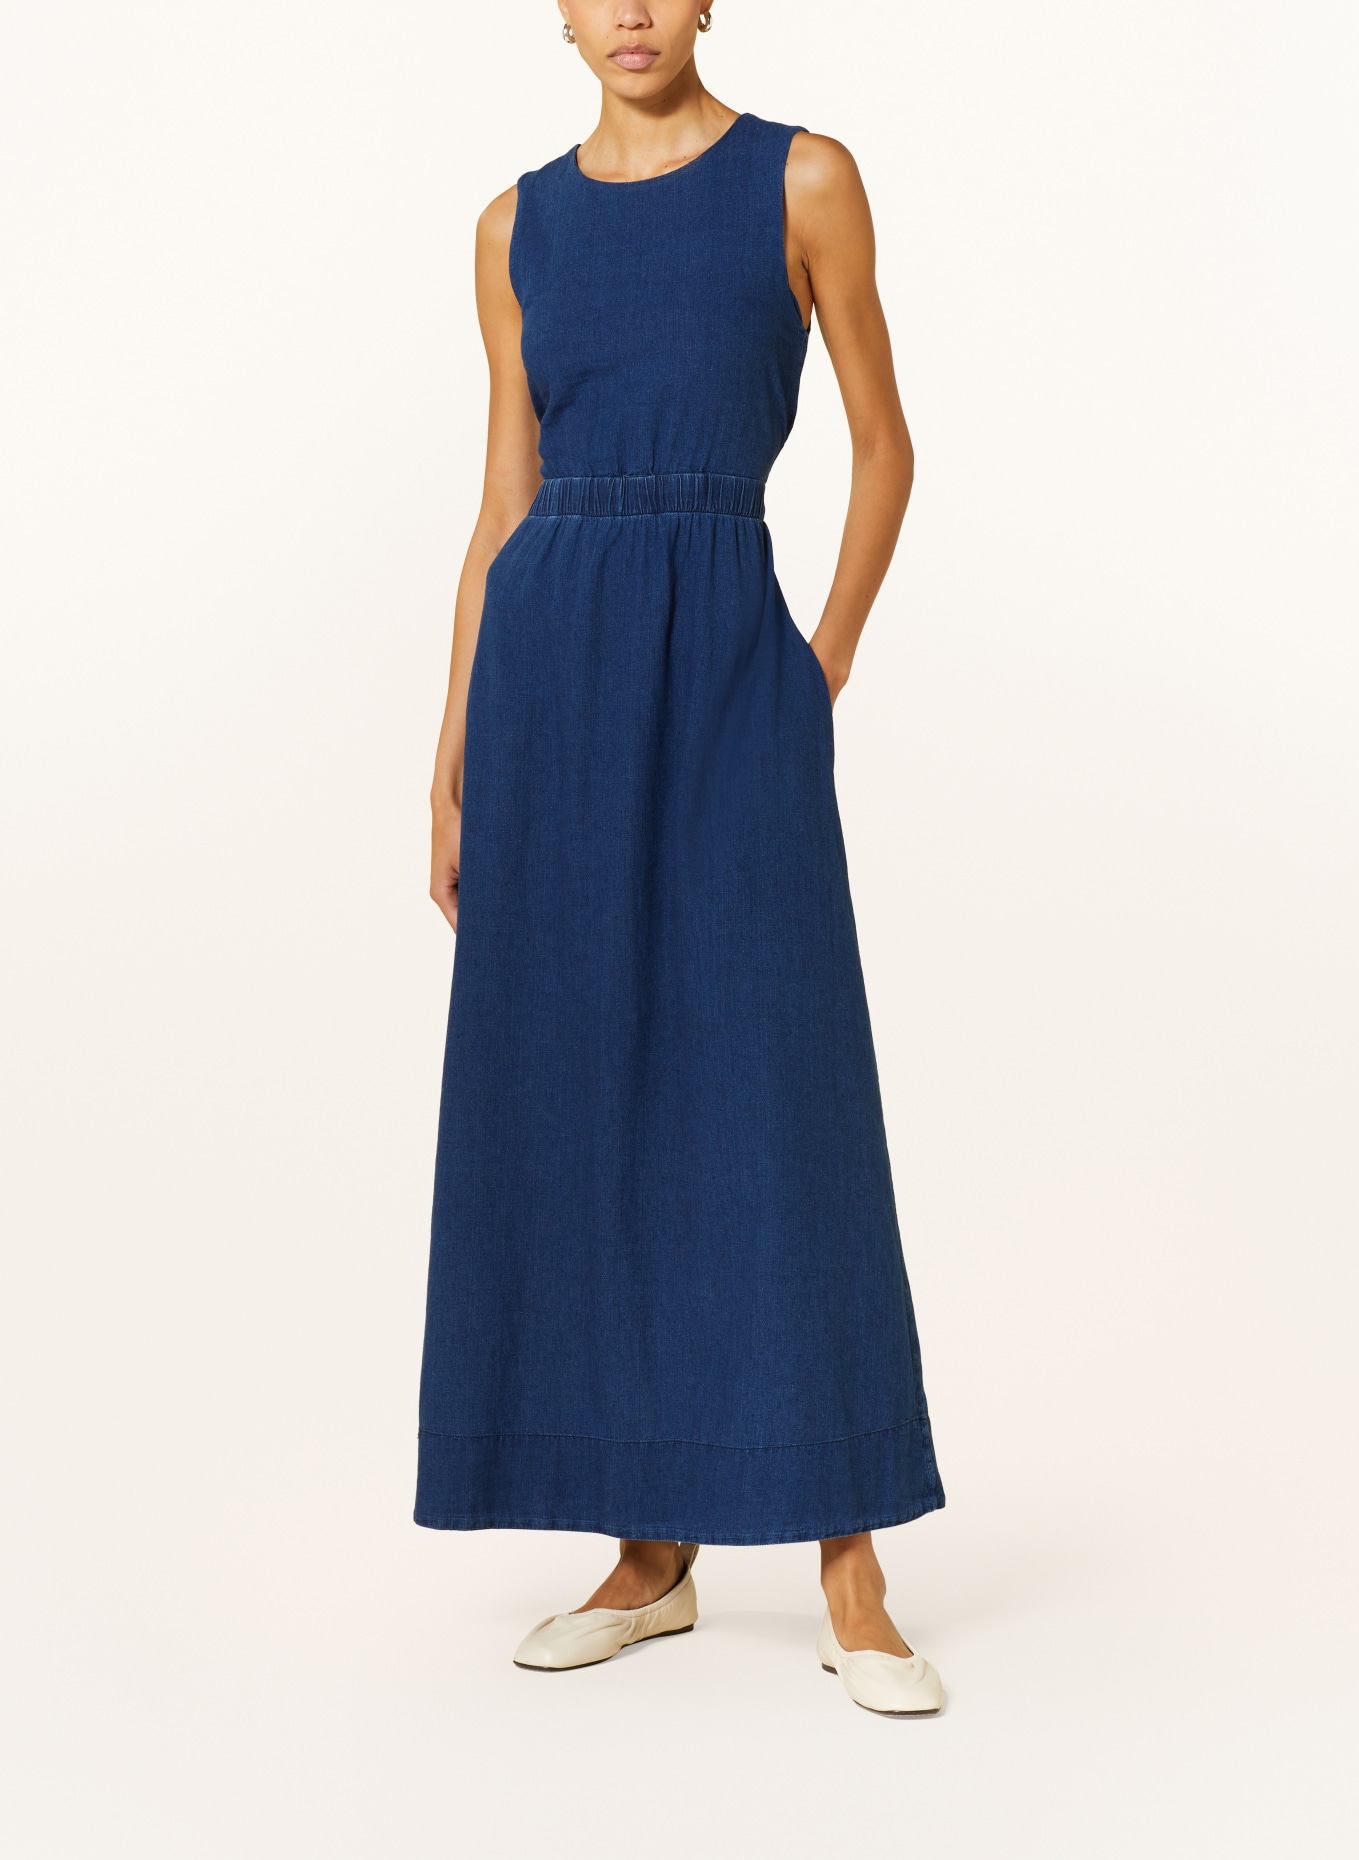 CLOSED Dress in denim look with cut-out, Color: DARK BLUE (Image 2)